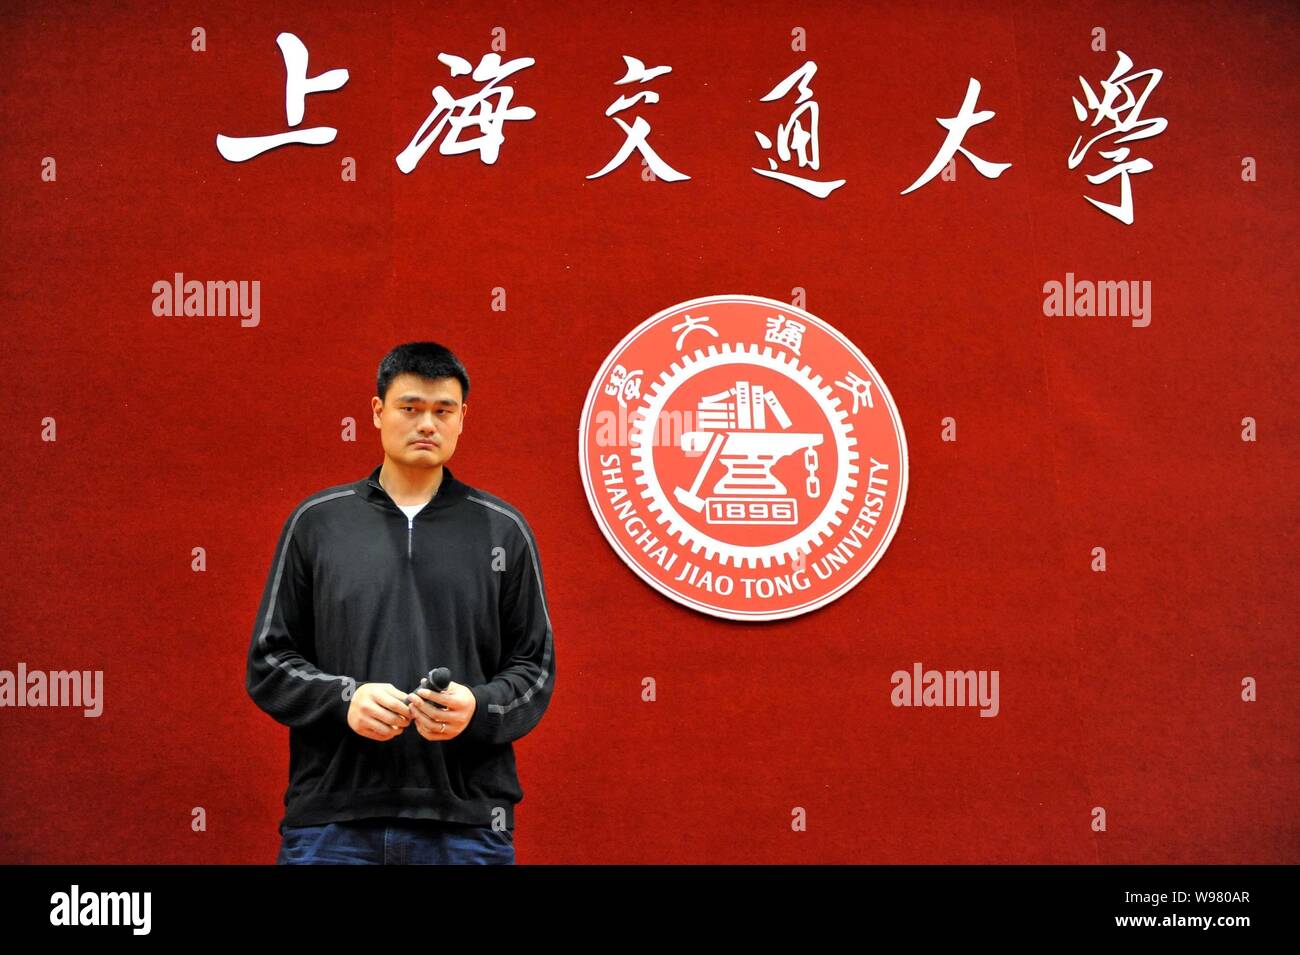 Retired Chinese NBA star Yao Ming is pictured during a press conference for his entrance to school in Shanghai Jiao Tong University in Shanghai, China Stock Photo